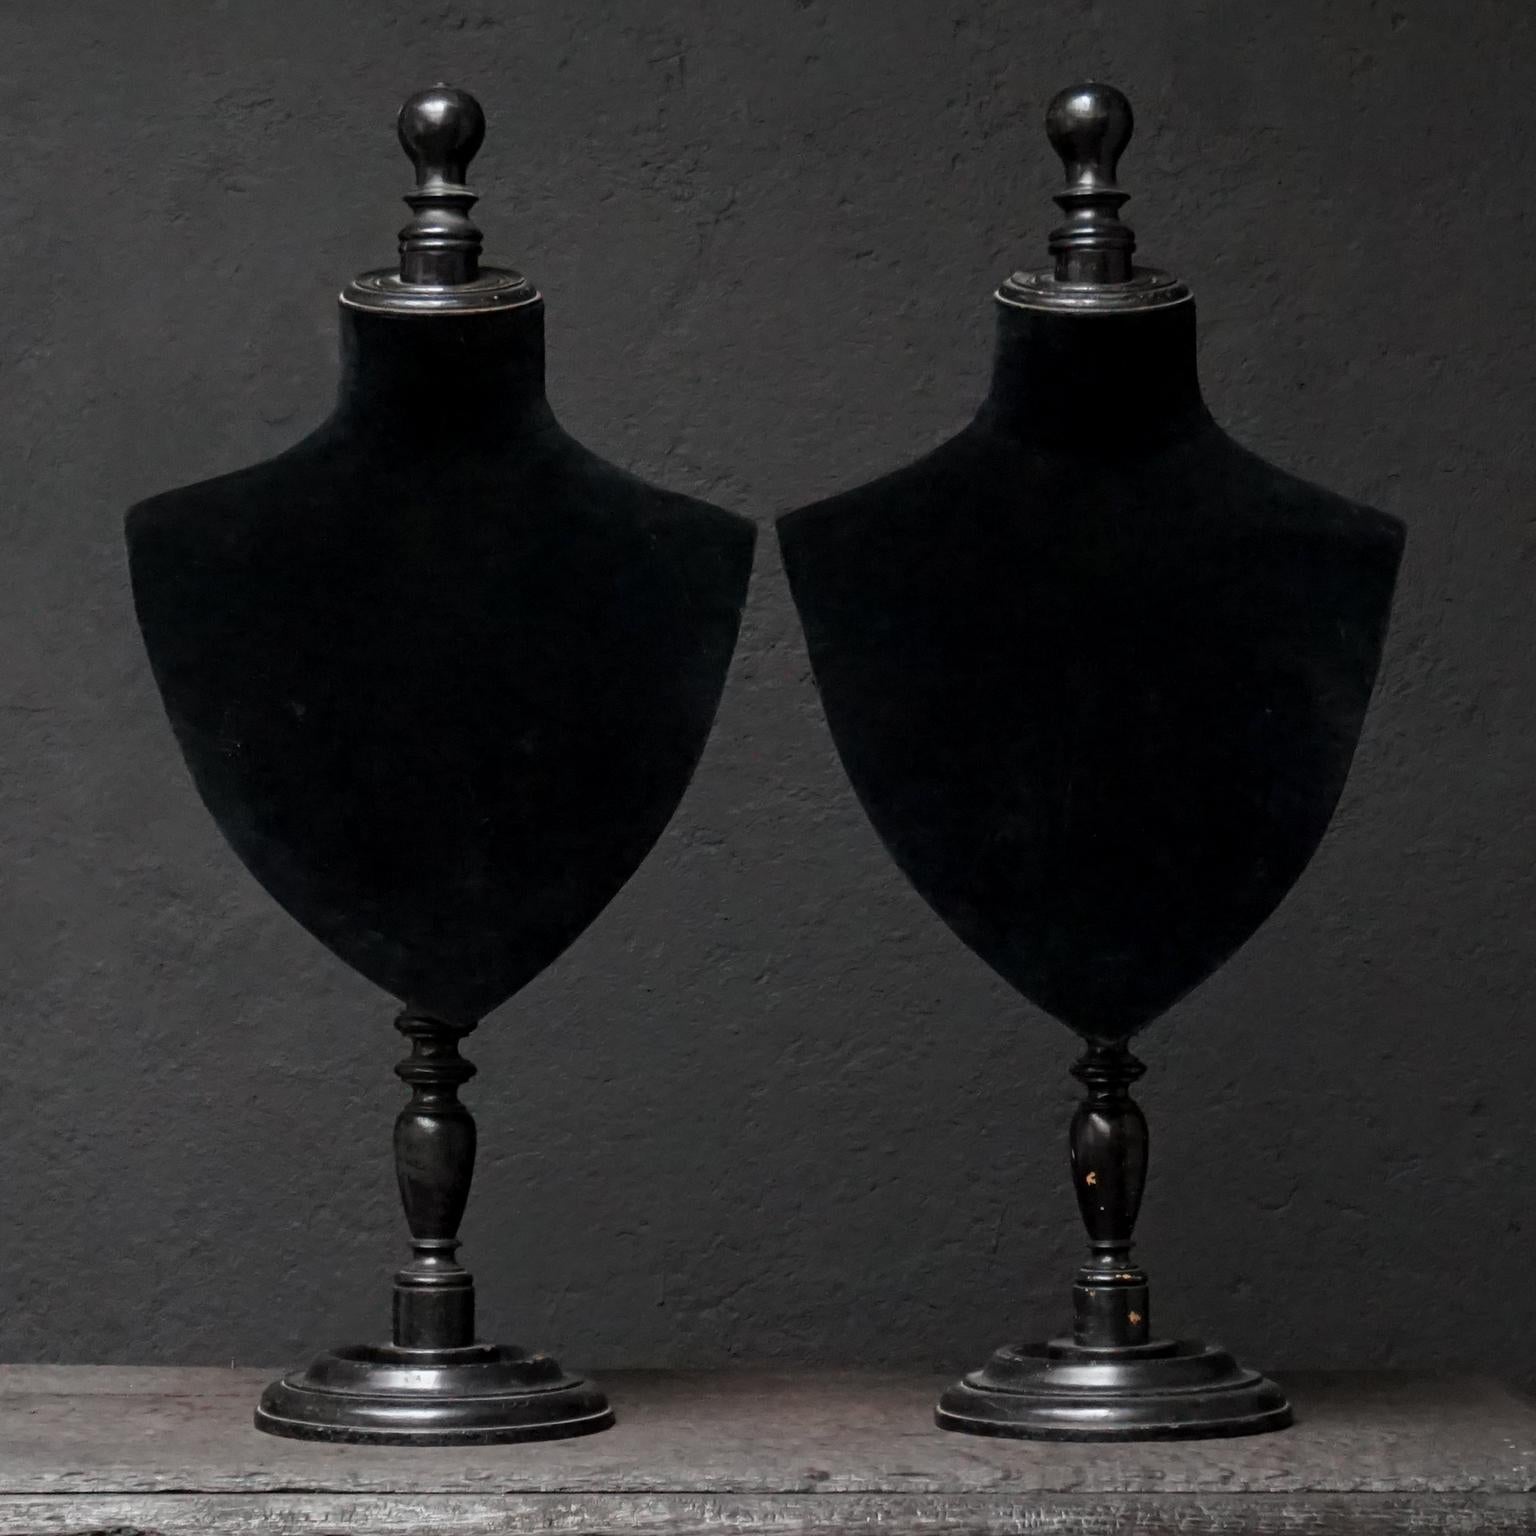 Rare set of antique jewelry display busts or dress mannequins, both made with a base and spindle made of blackened wood and papier mâché board lined with black velvet.

Beautifully handmade velvet stands for an amazing way to display a special